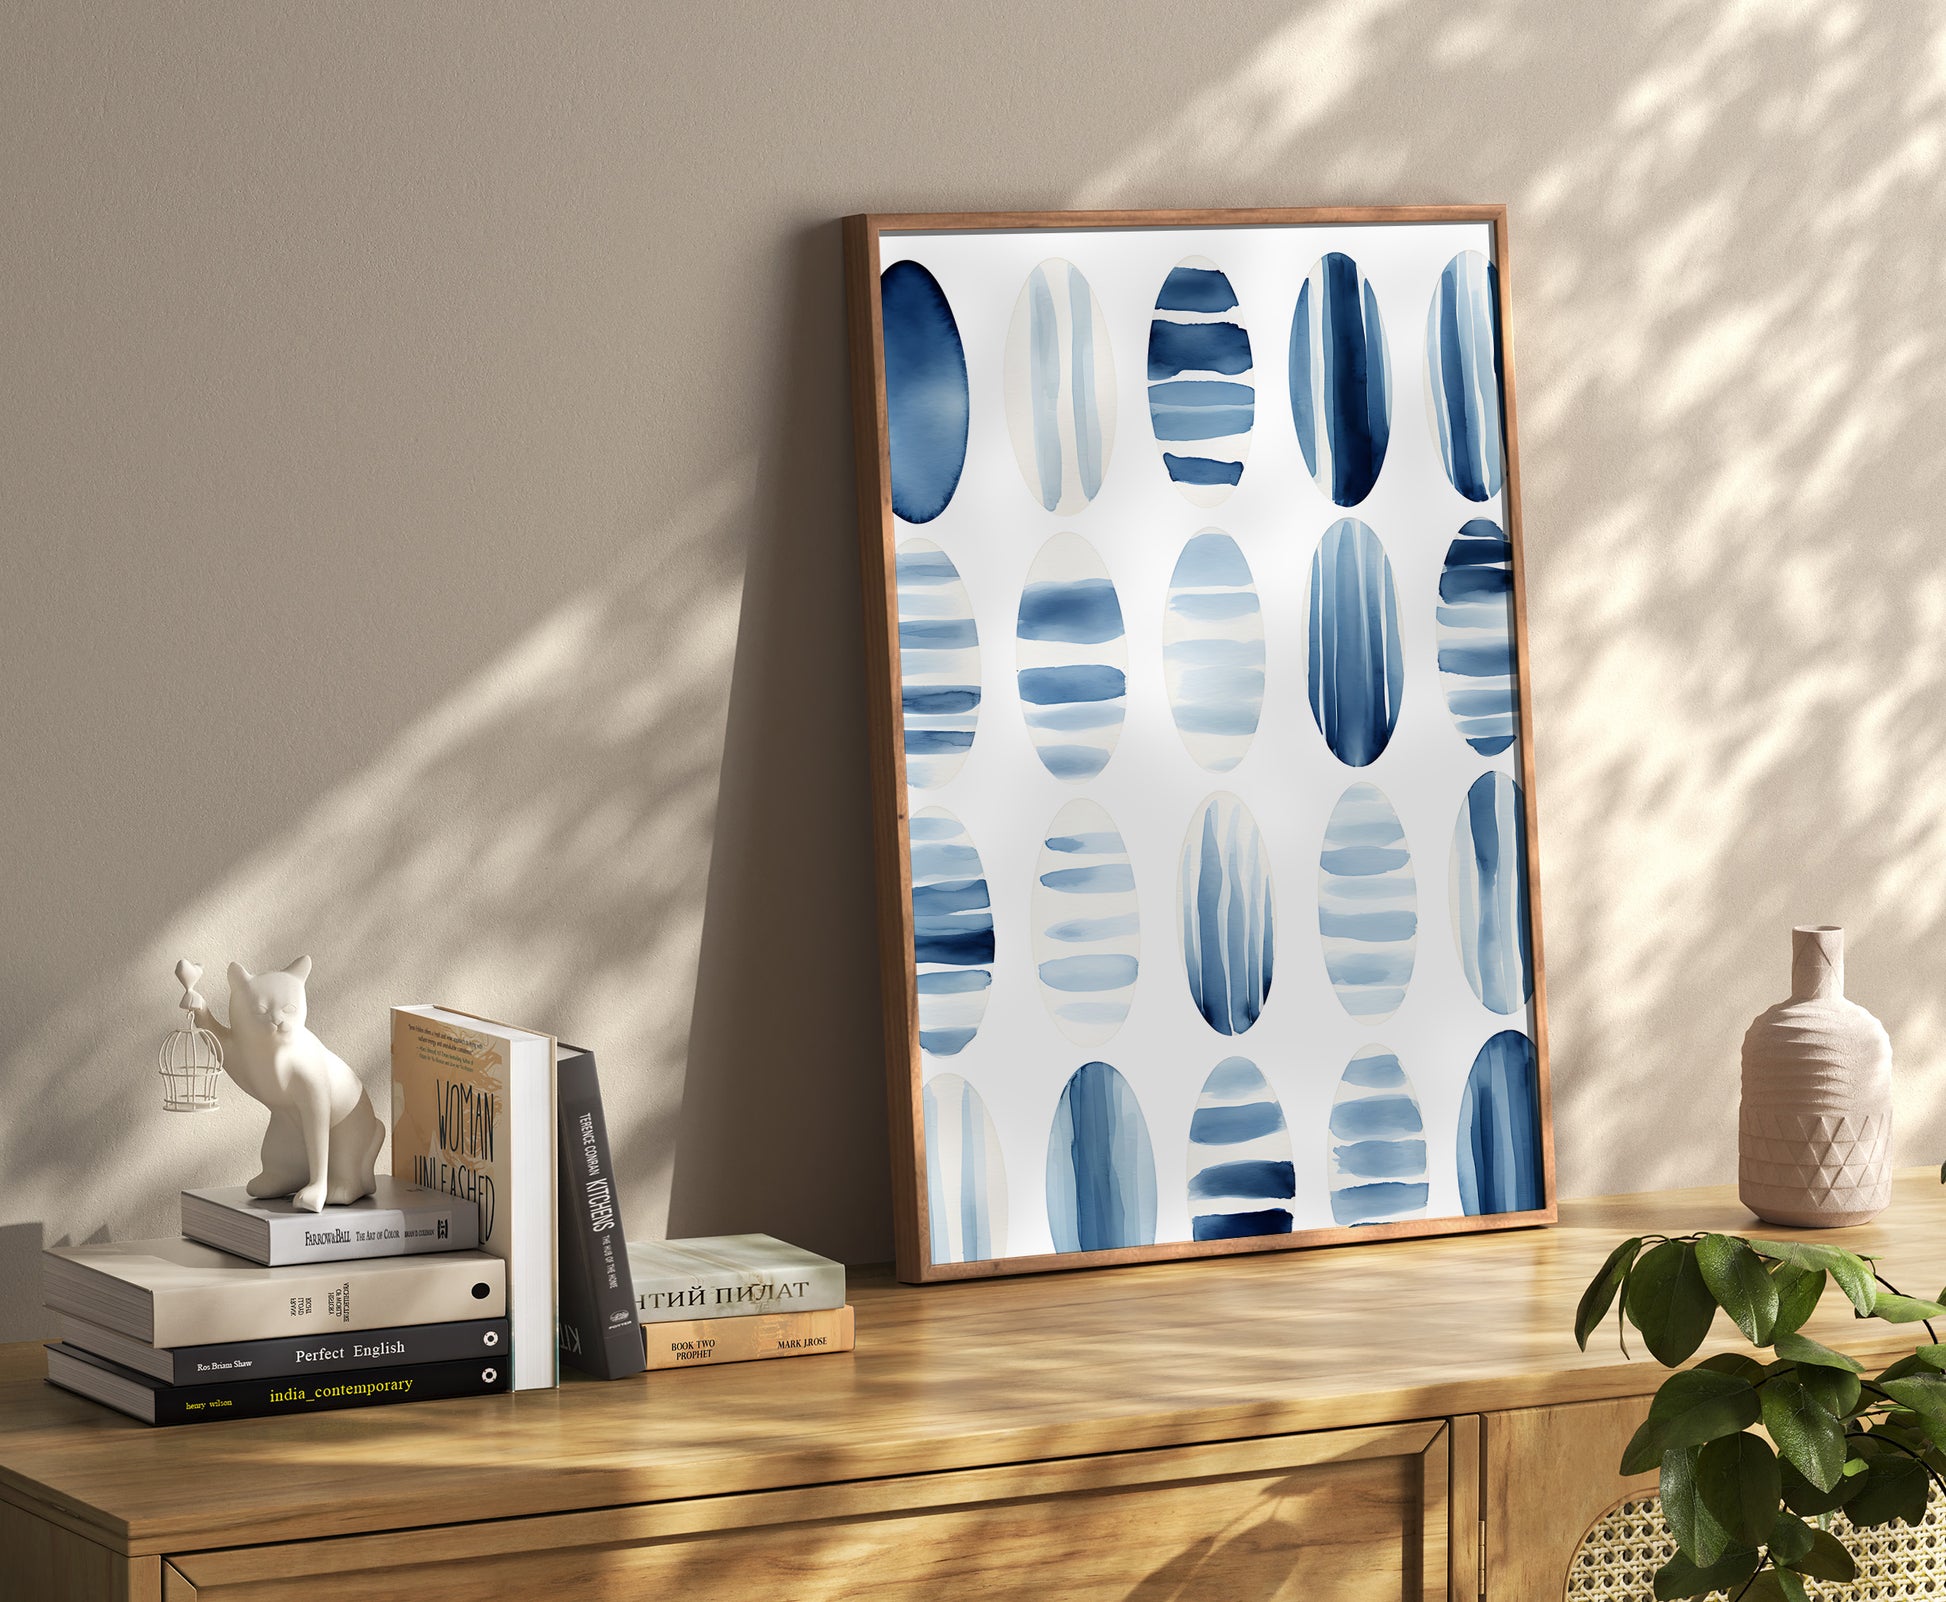 Modern art canvas with blue abstract design in a stylish room with decor items and books.